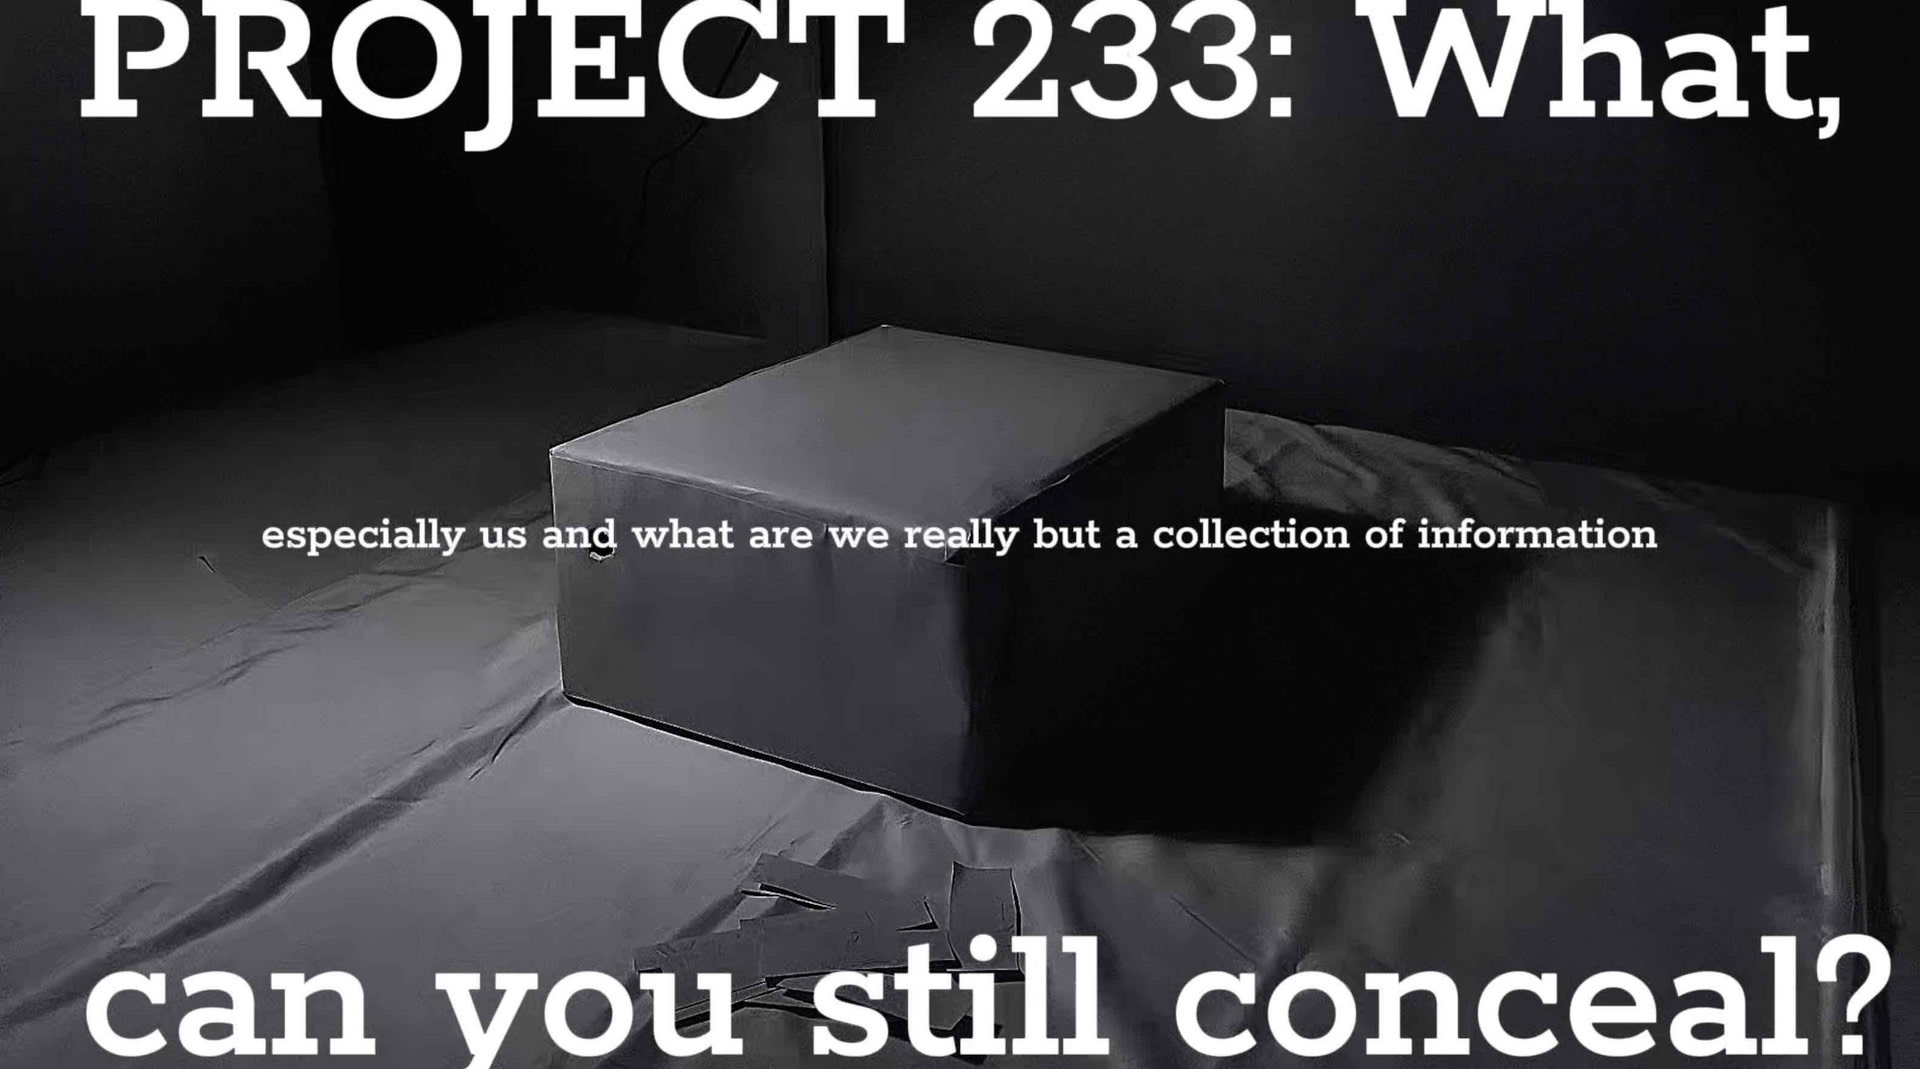 The black and white box picture matches the project title of Project 233